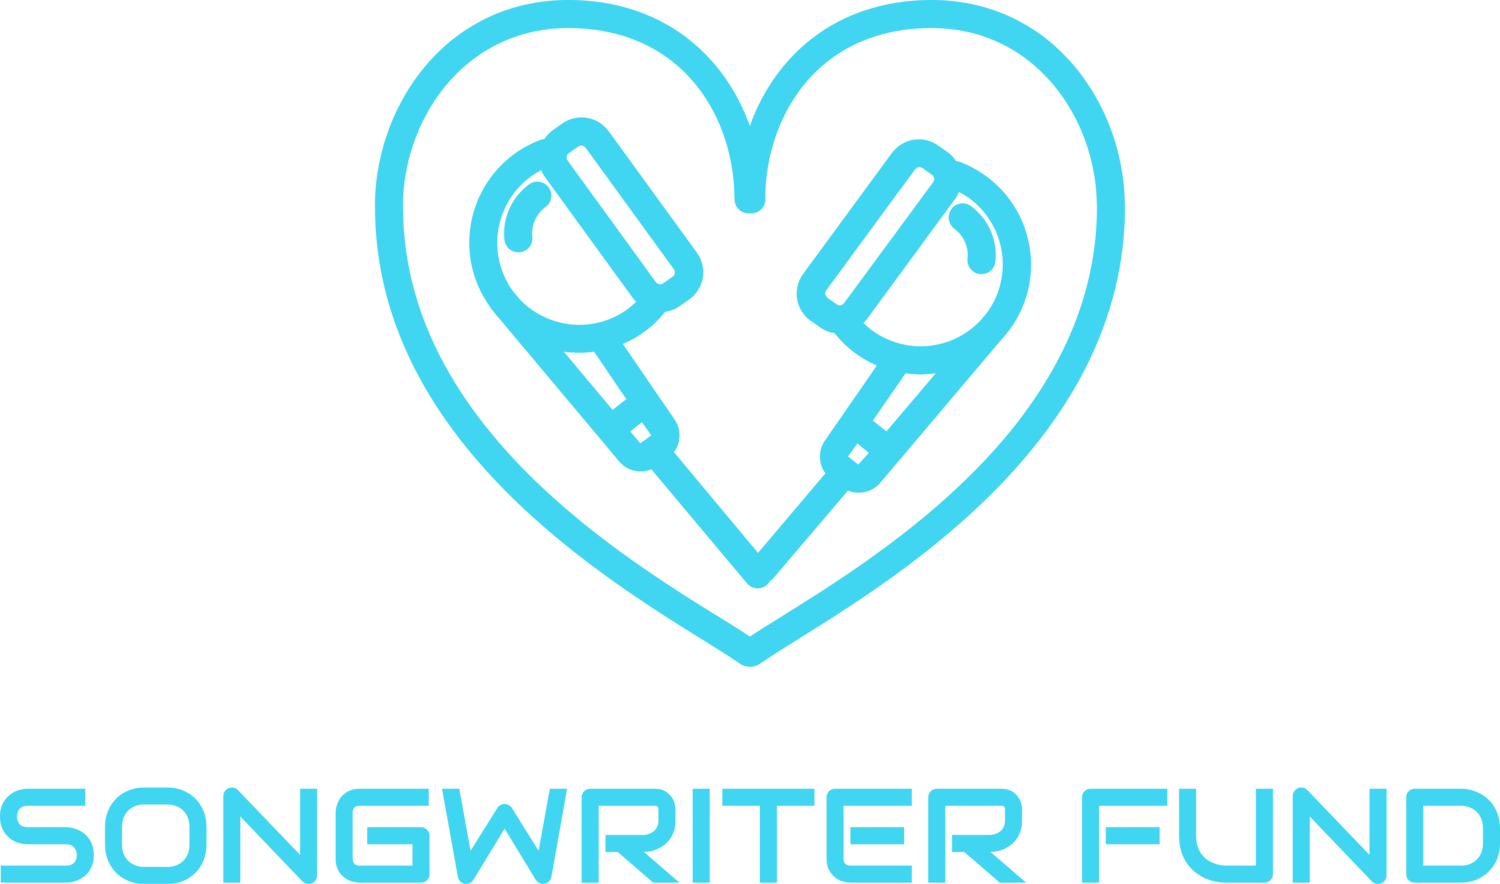 The Songwriter Fund